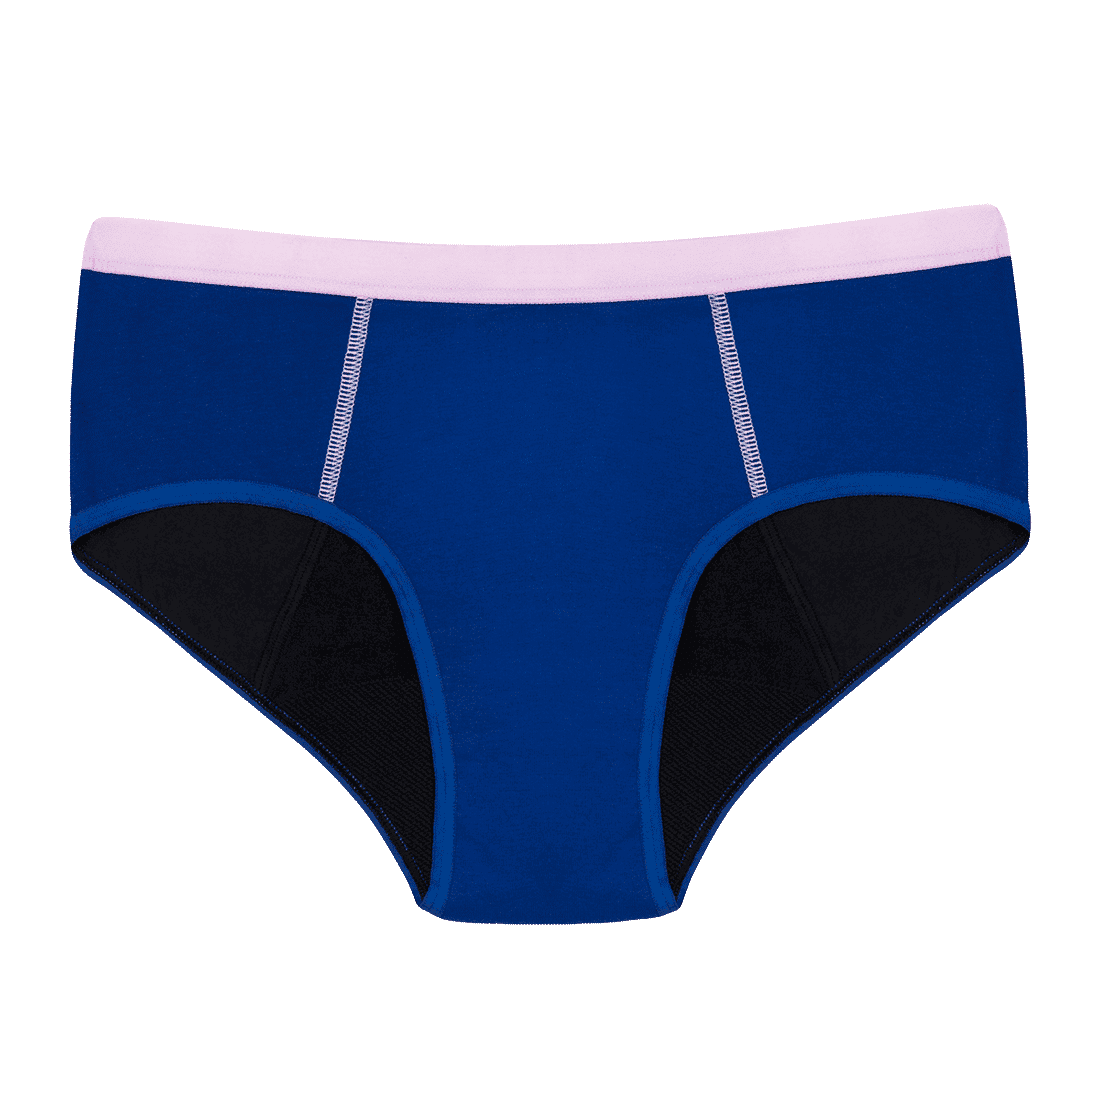 Best Period Underwear of 2022: 6 Sustainable Options - EcoWatch